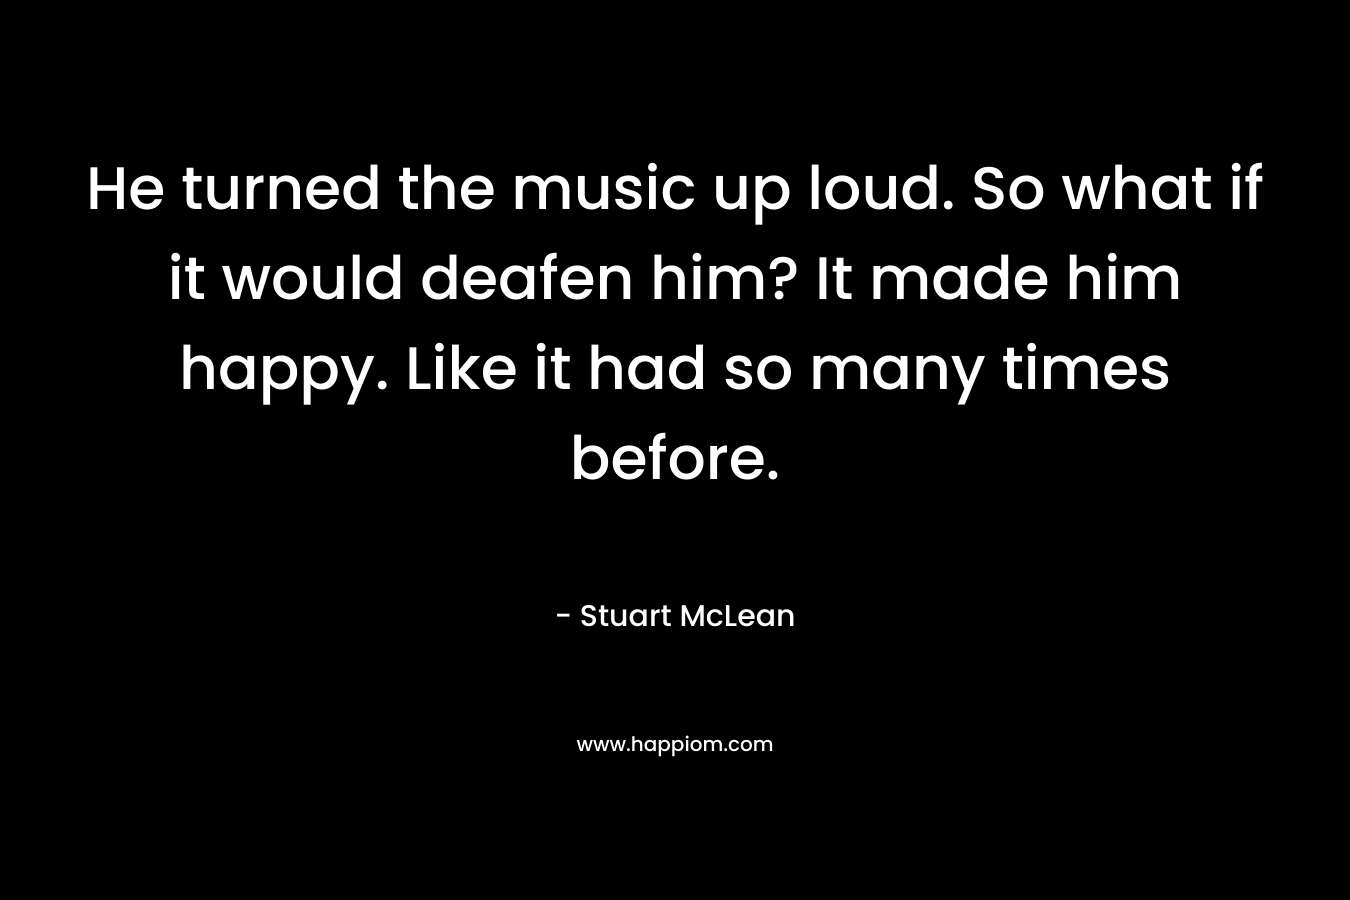 He turned the music up loud. So what if it would deafen him? It made him happy. Like it had so many times before.